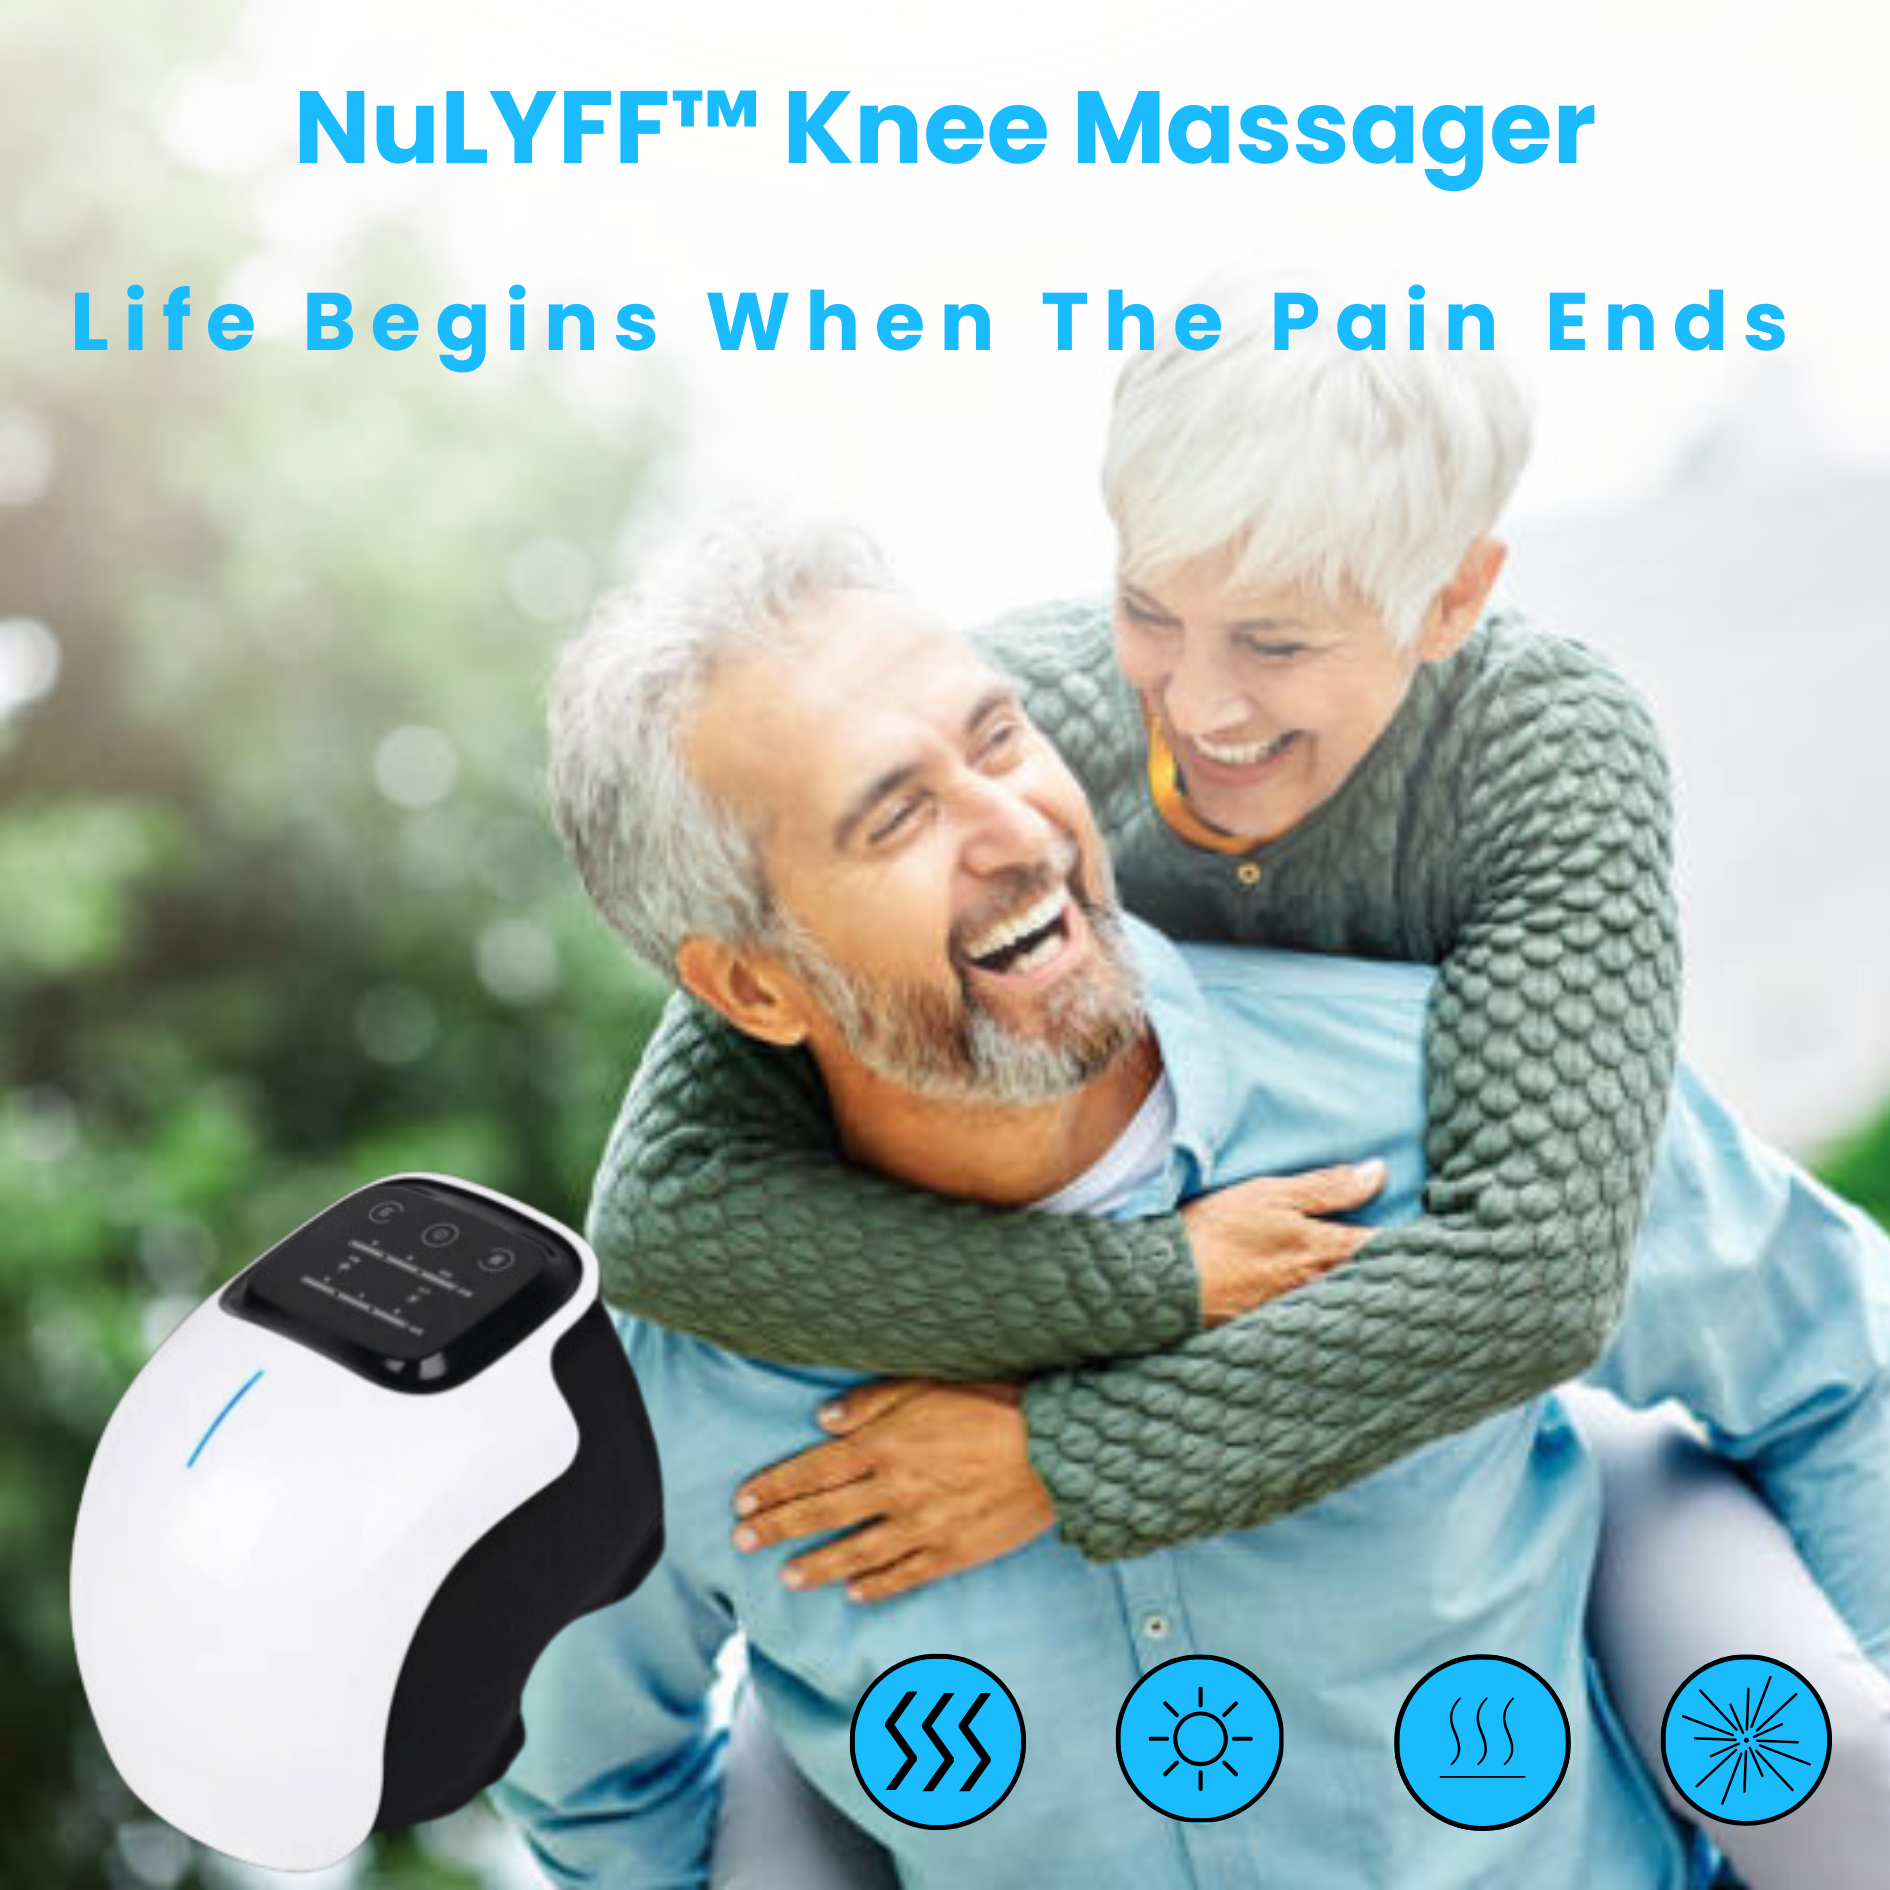 Image of Happy man holding a female or a partner on his back outdoors enjoying them self after receiving relief from NuLYFF Knee Massager. Has a quote "Life Begins when the Pain Ends" and with key futures of the massager Red light, Infrared, Heat, and high-Frequency vibration symbols at the bottom of the page.